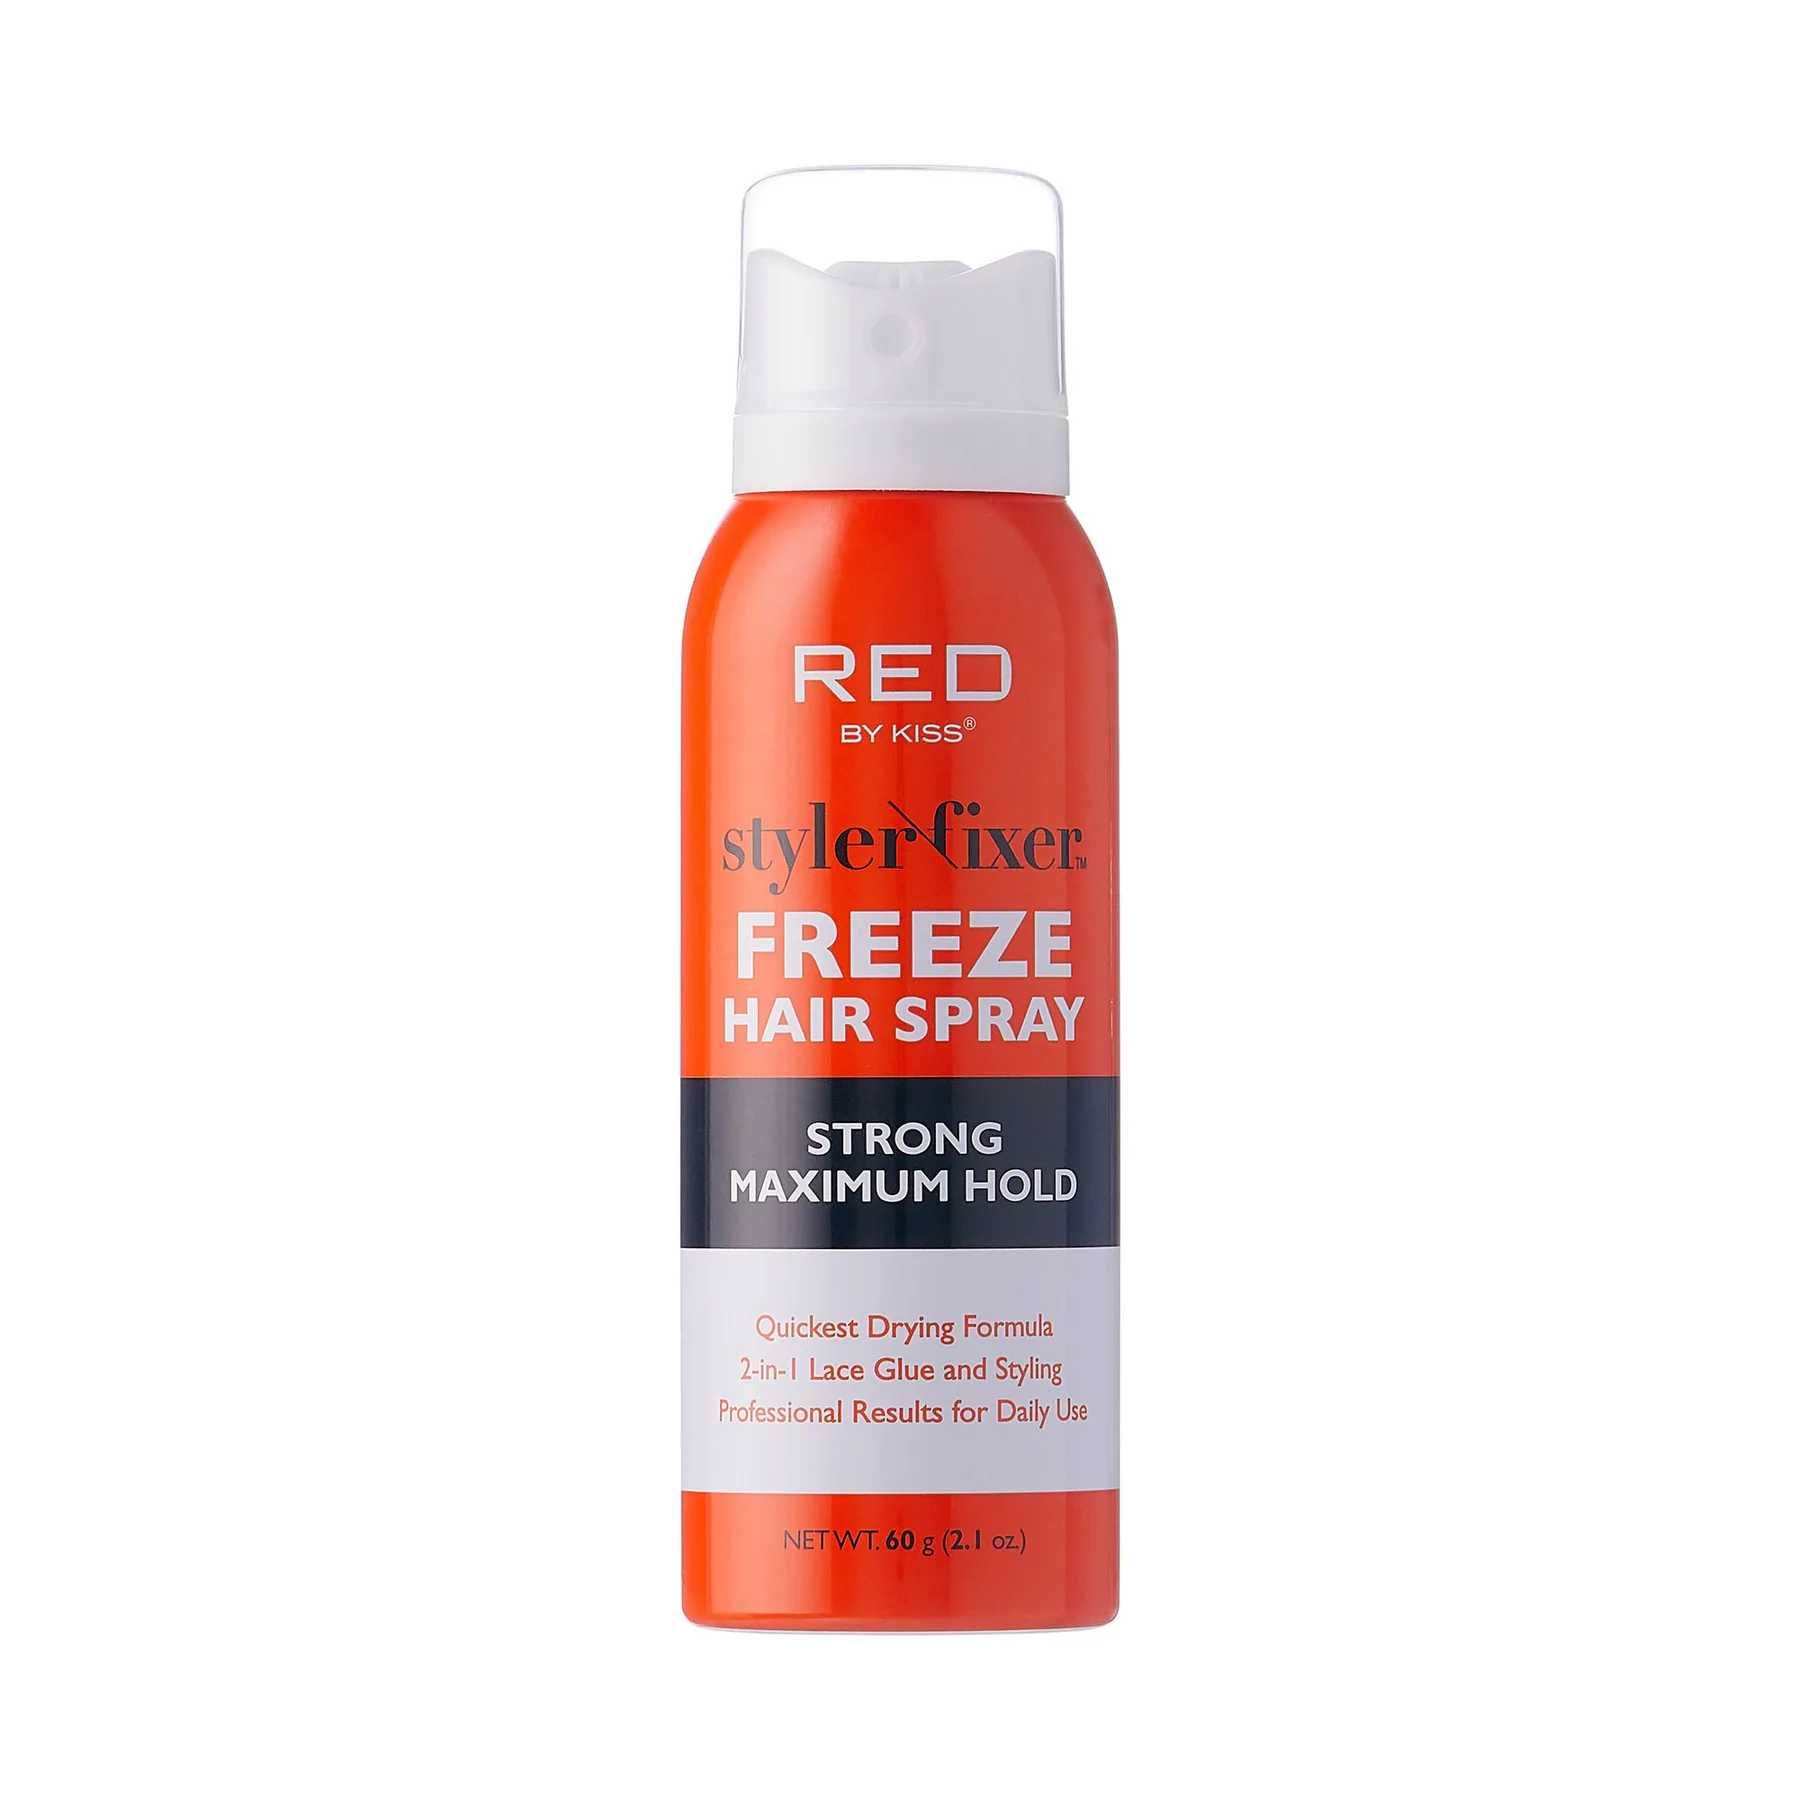 Red by Kiss Styler Fixer Freeze Hair Spray 2oz - Strong Maximum Hold